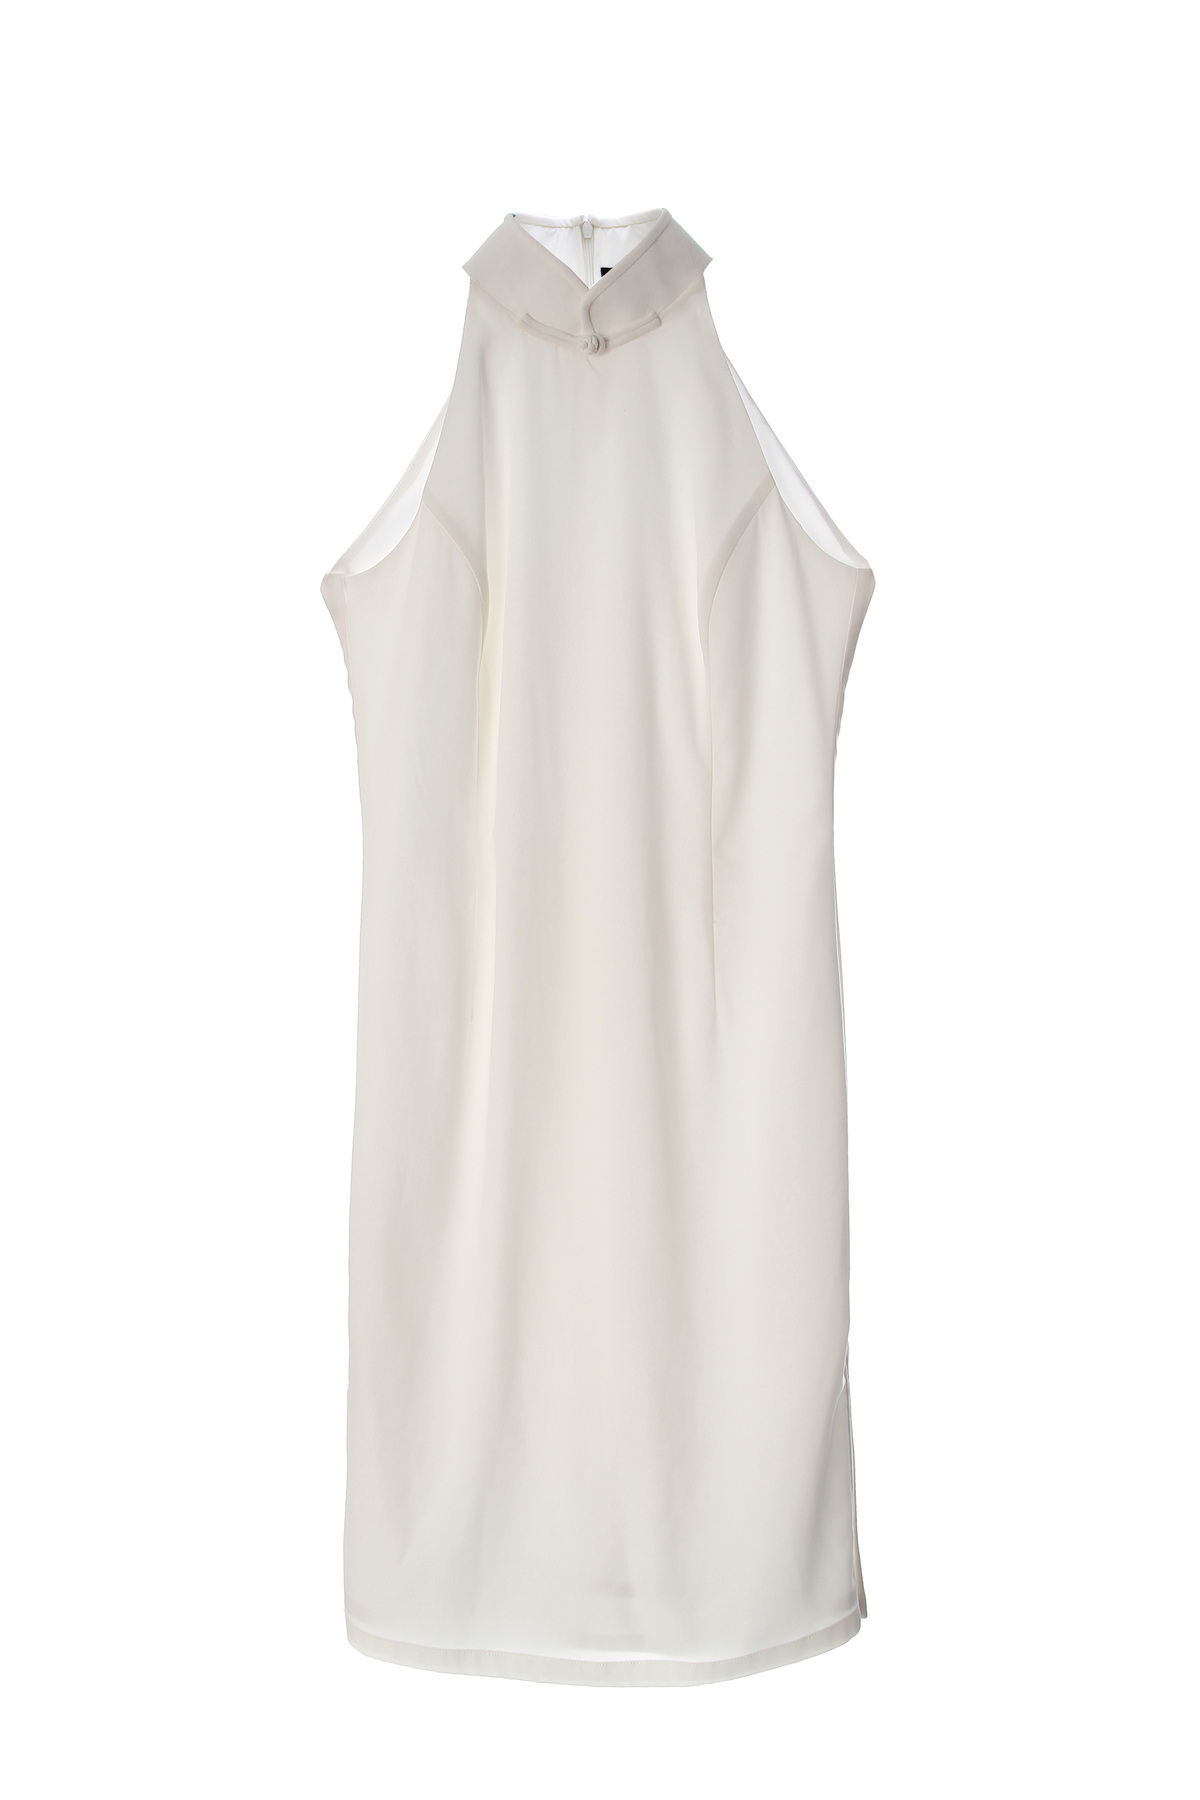 Frankie Halter 旗袍 - 12 个再生水瓶 - 白色｜Frankie Halter Qipao- 12 Recycled Water Bottles - White